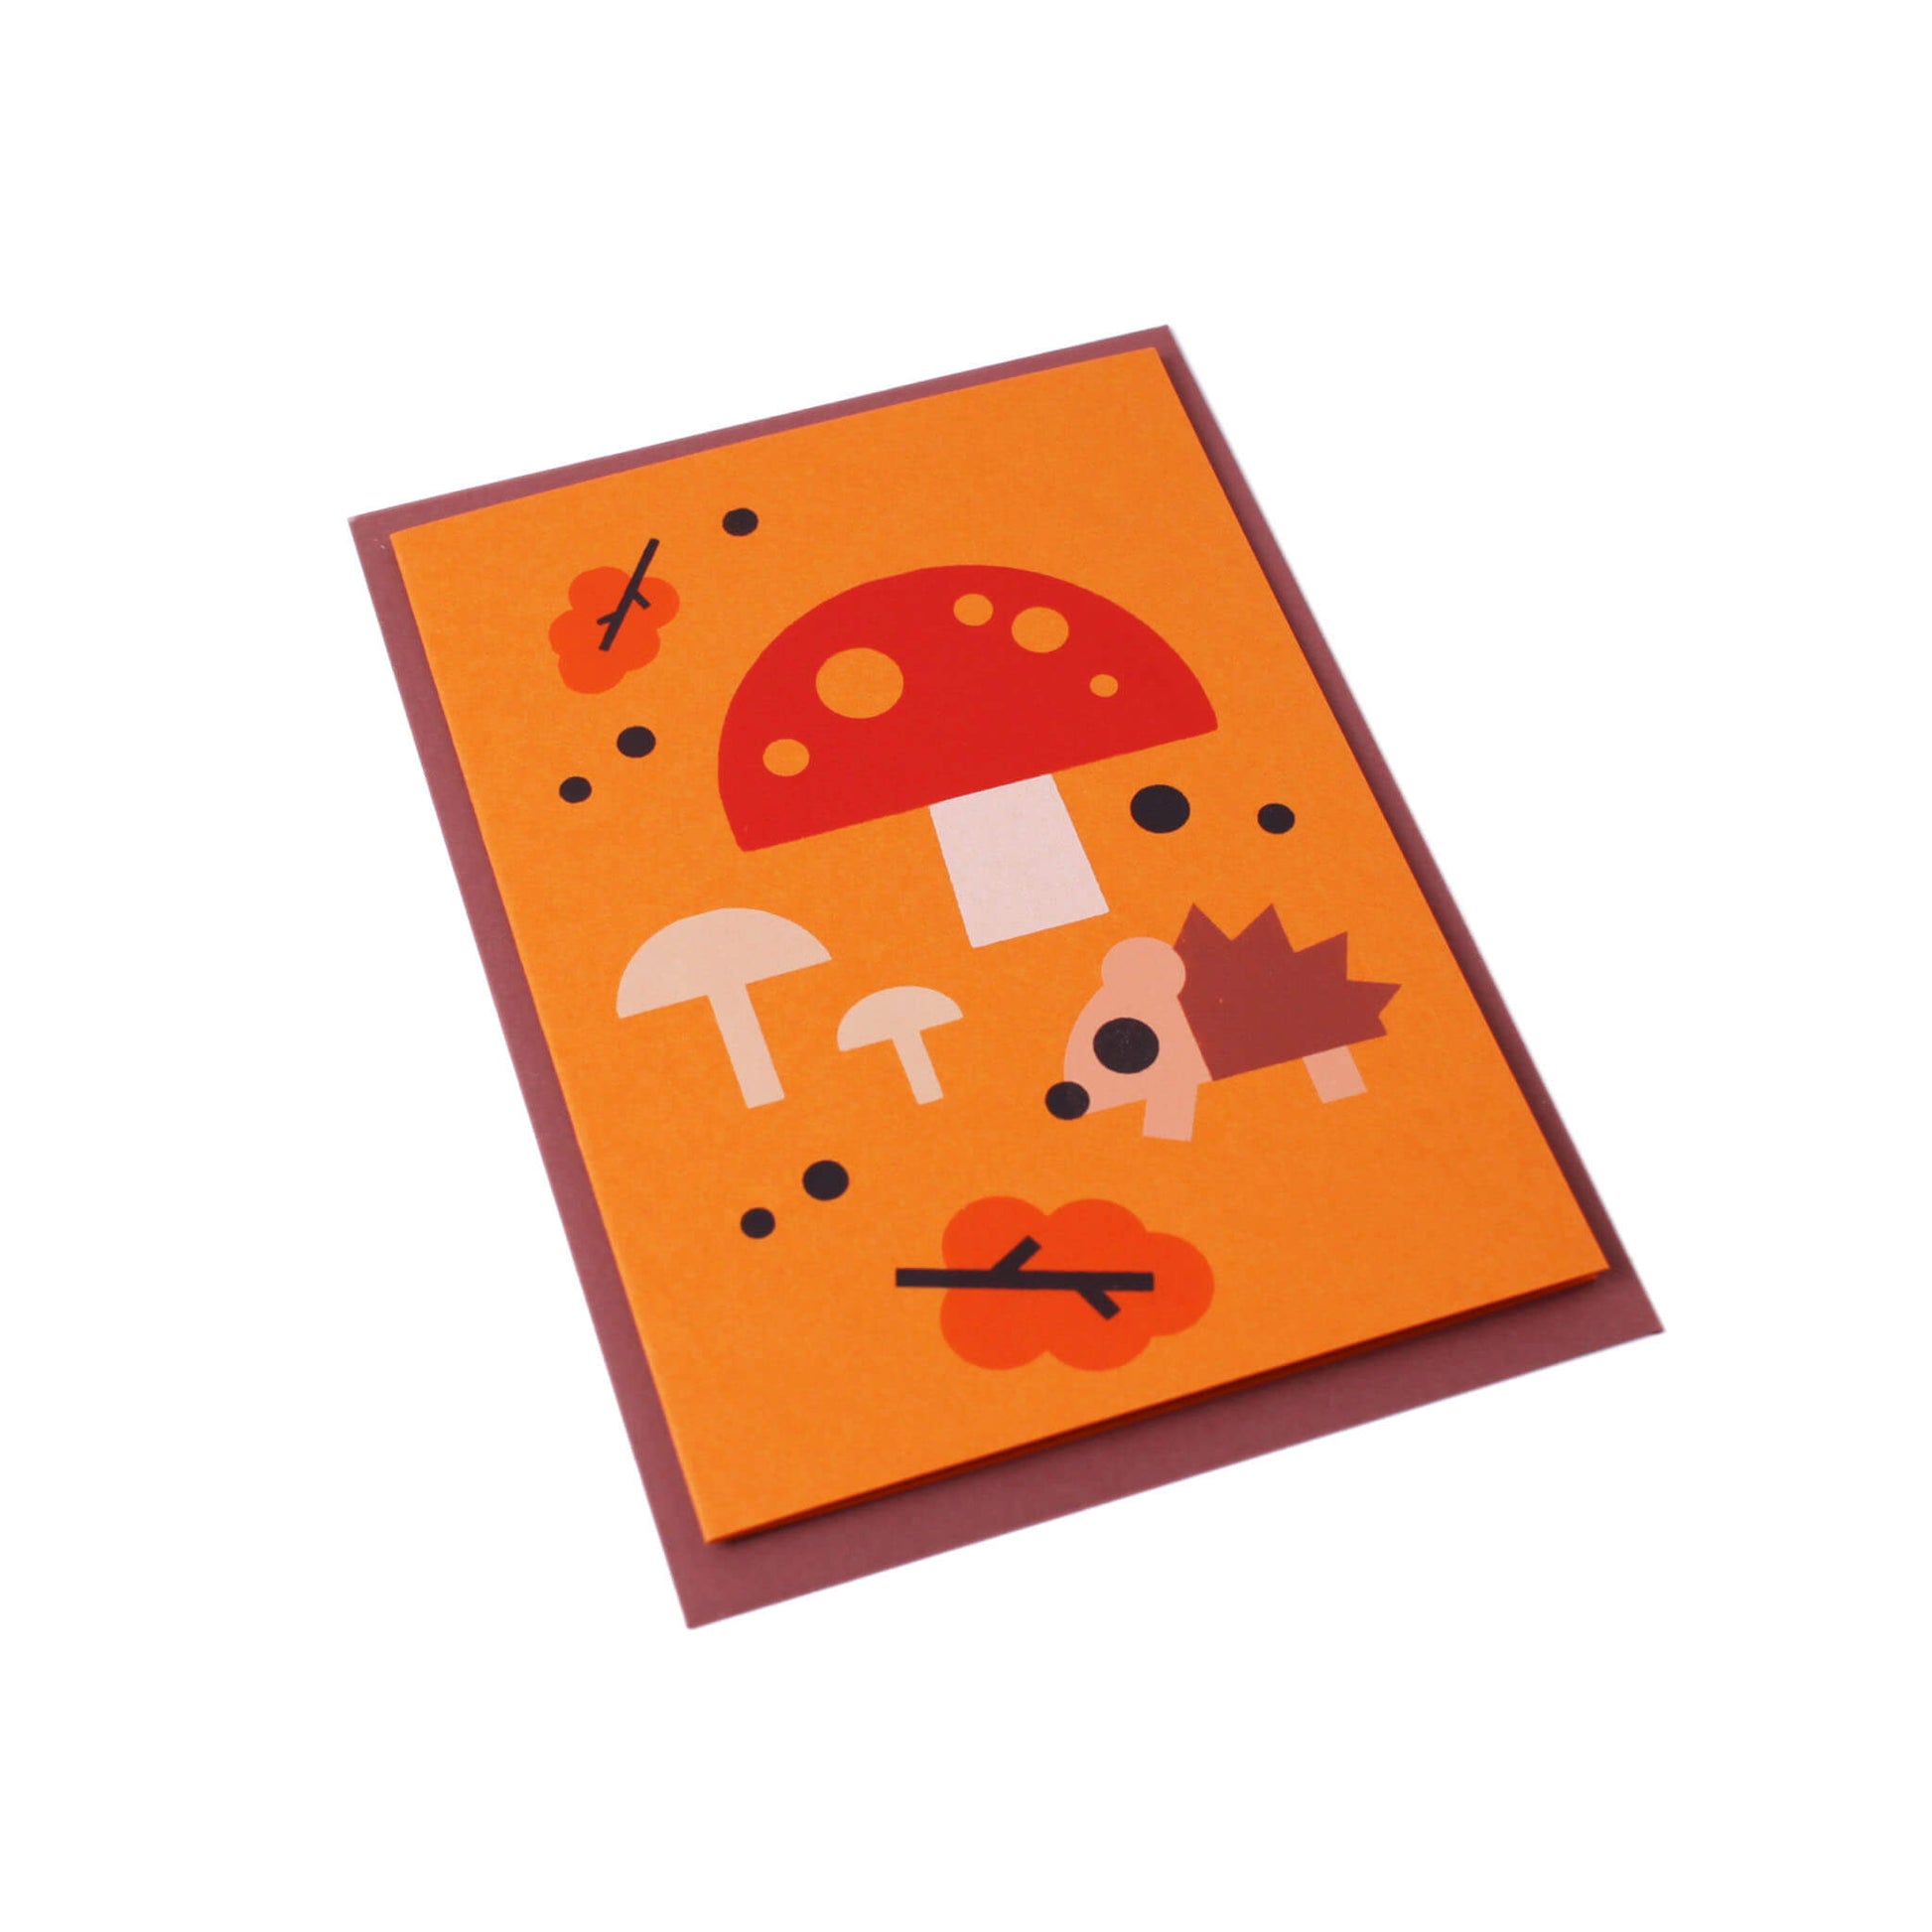 A tilted orange greeting card with an illustration of a hedgehog, mushrooms, leaves and scattered dots in the background. A brown envelope is visible behind the card.